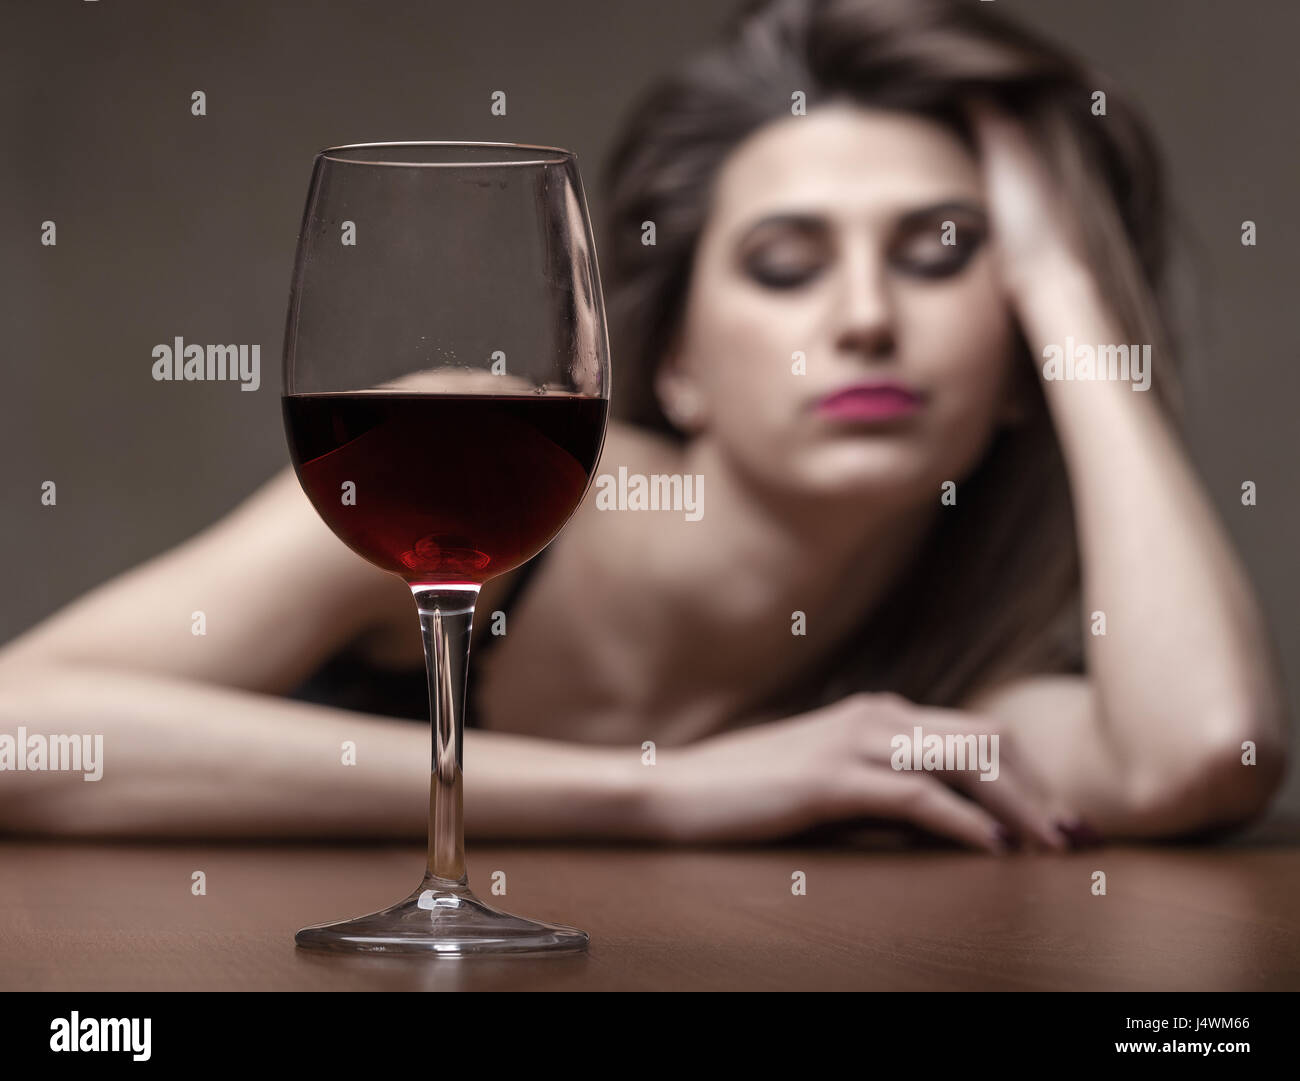 Young beautiful woman in depression, drinking alcohol on dark background. Focus on the glass Stock Photo